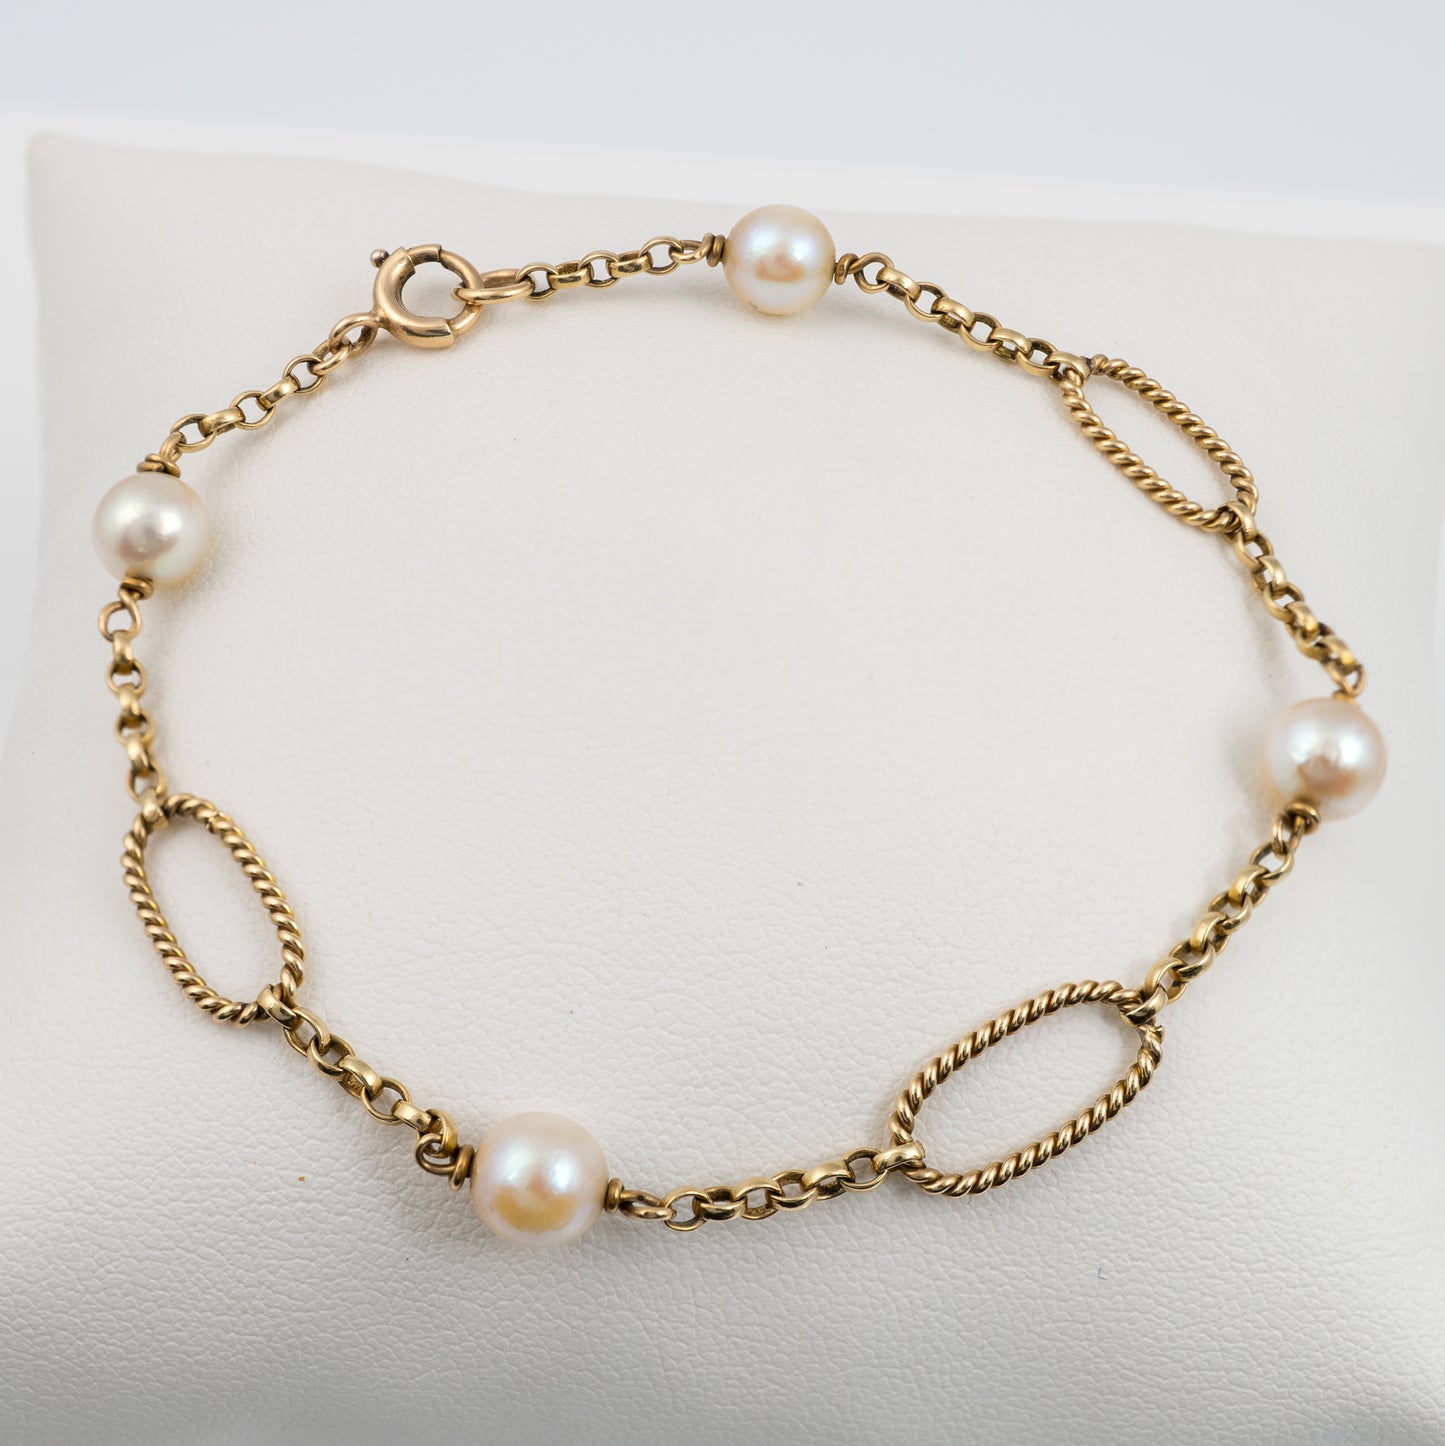 Antique Freshwater Pearl Bracelet in 9ct Gold - 17.5 Inches